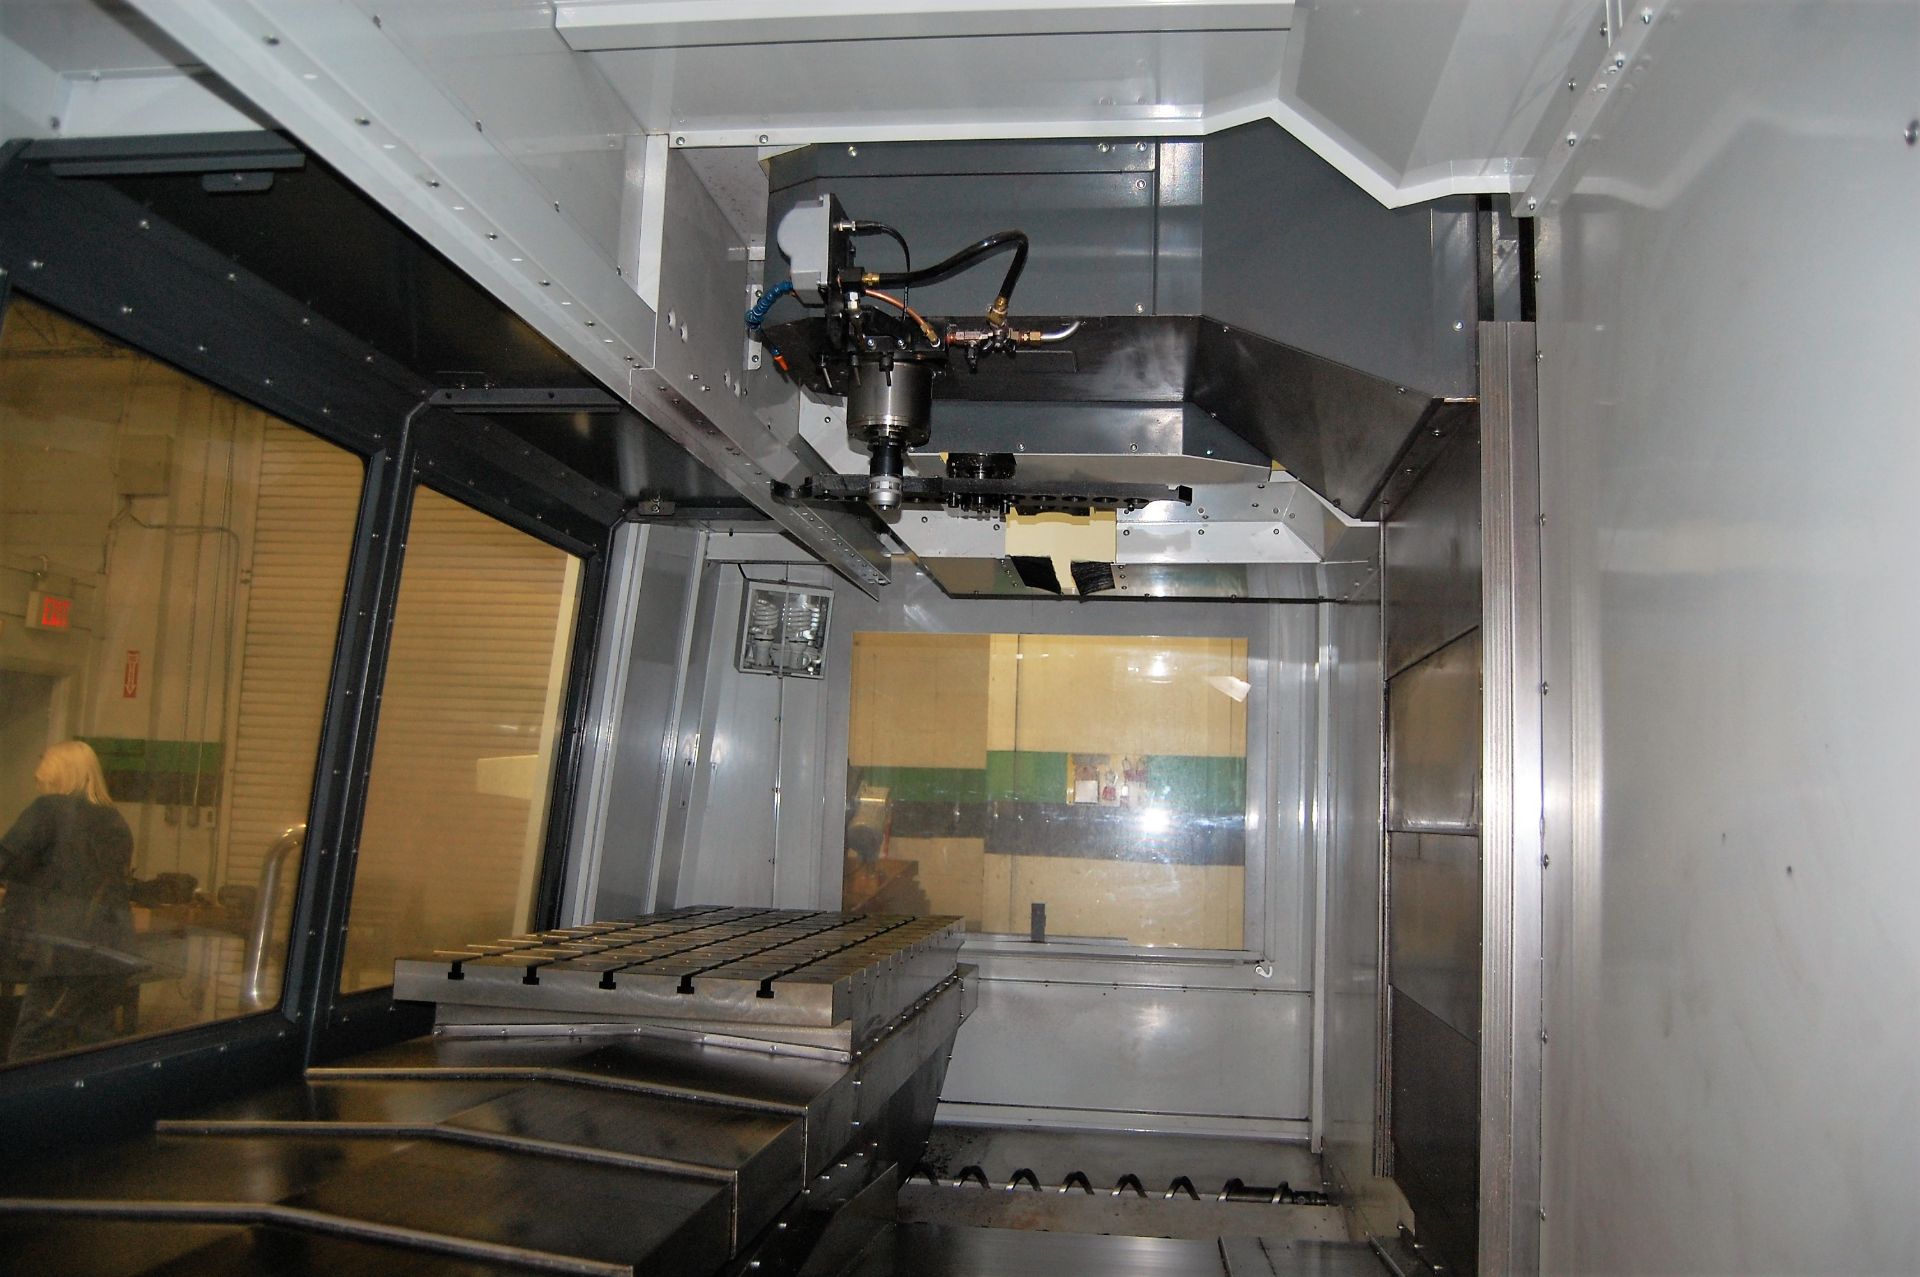 Haas Model VM-6 3-Axis Mold Maker CNC Vertical Machining Center - Image 8 of 17